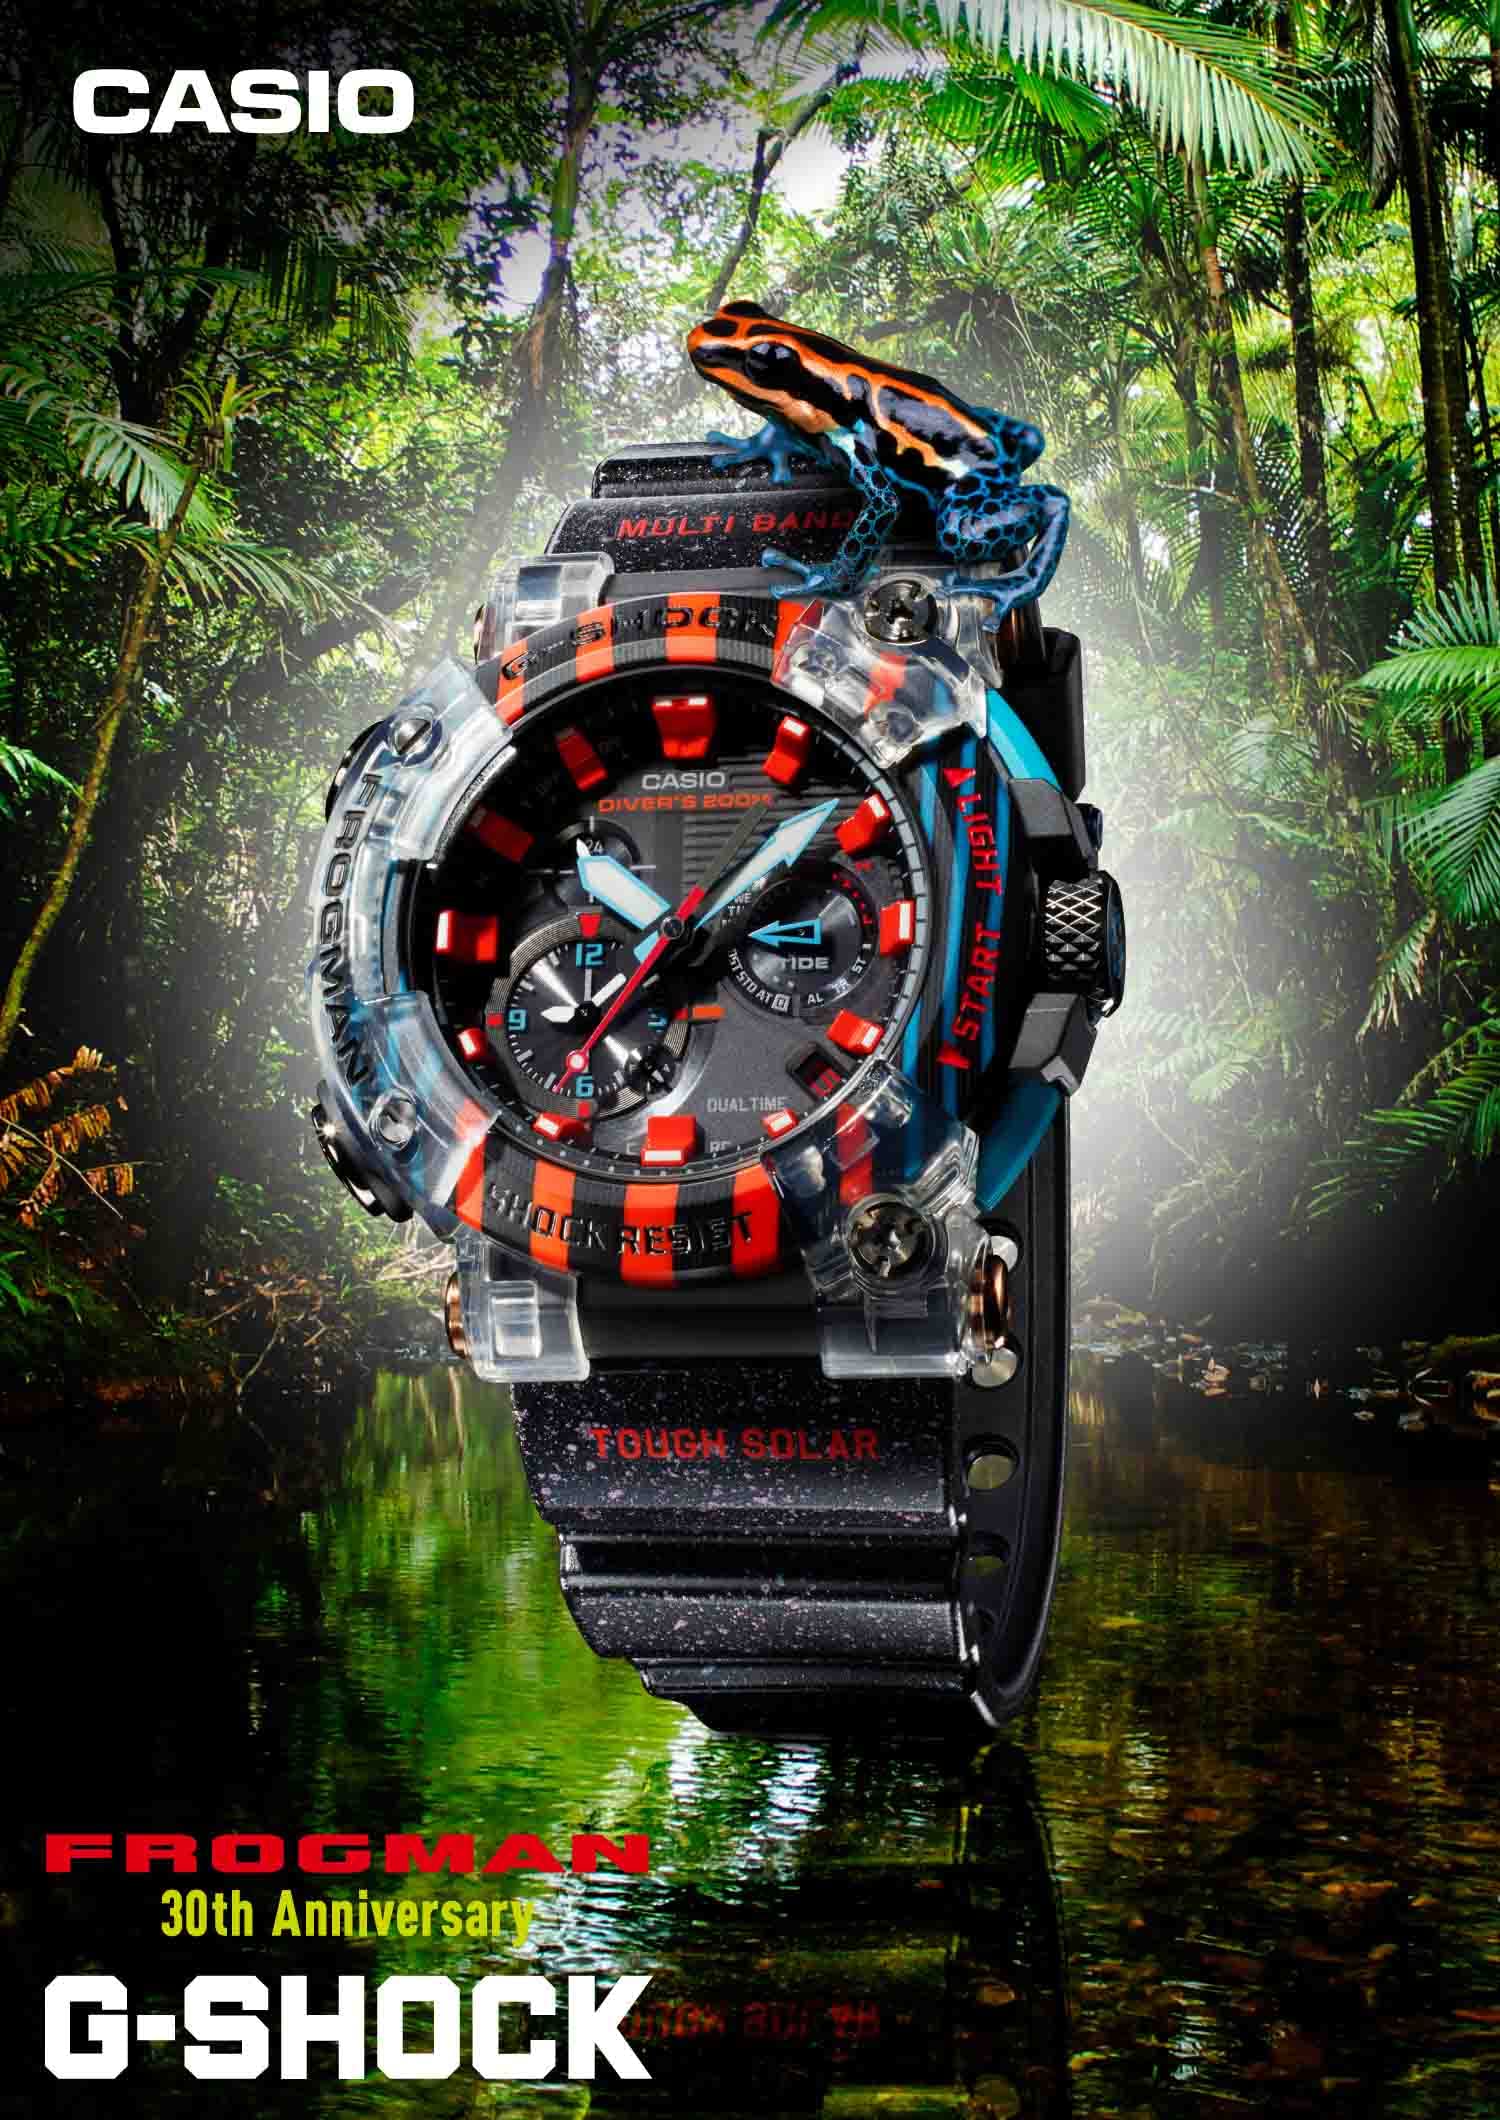 Casio mens watches G-Shock FROGMAN GWF-A1000APF-1AJR 30th Anniversary Limited Edition (Japan Domestic Genuine Products)